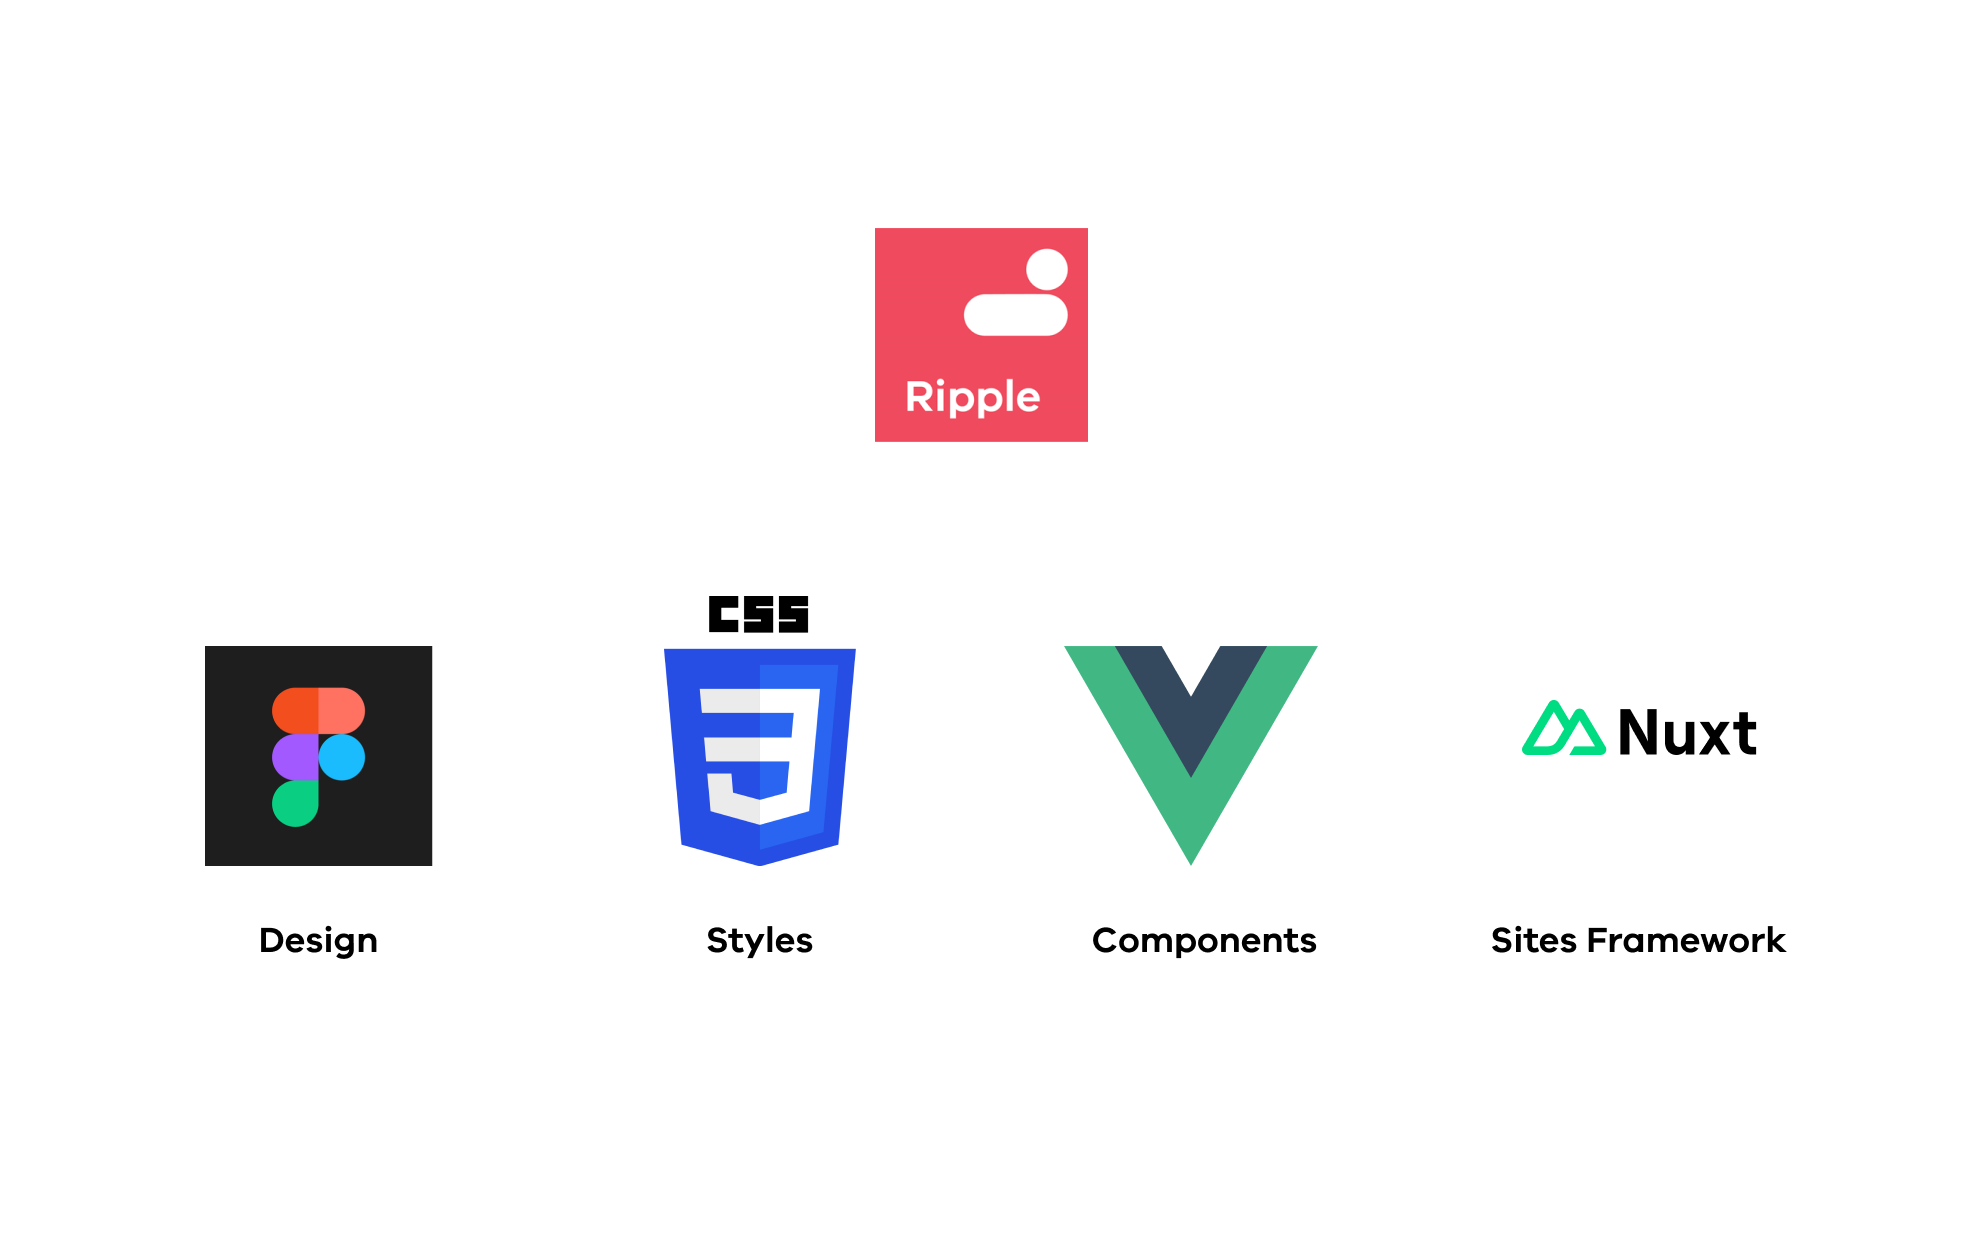 ripple is made up of Figma design, CSS styles, Vue JS components and Nuxt JS Sites